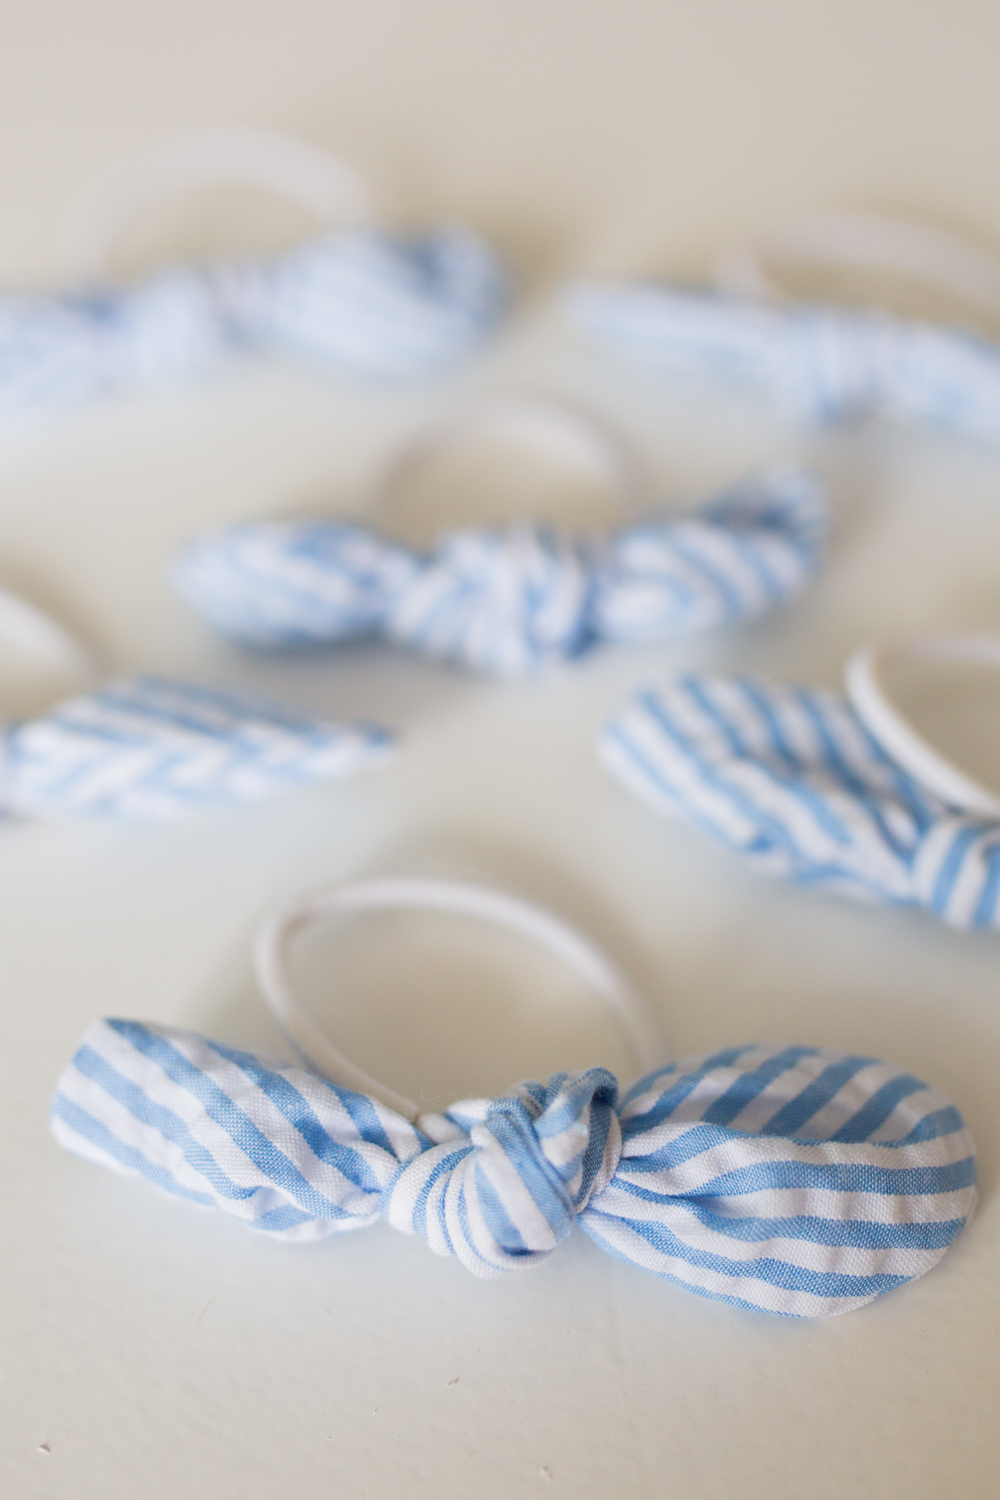 Sunshine Style Co. Elastic Bow Hair Ties / Hair Accessory / Preppy Outfit Inspiration / Blue Seersucker Fabric - Sunshine Style, A Florida based Fashion and Lifestyle Blog